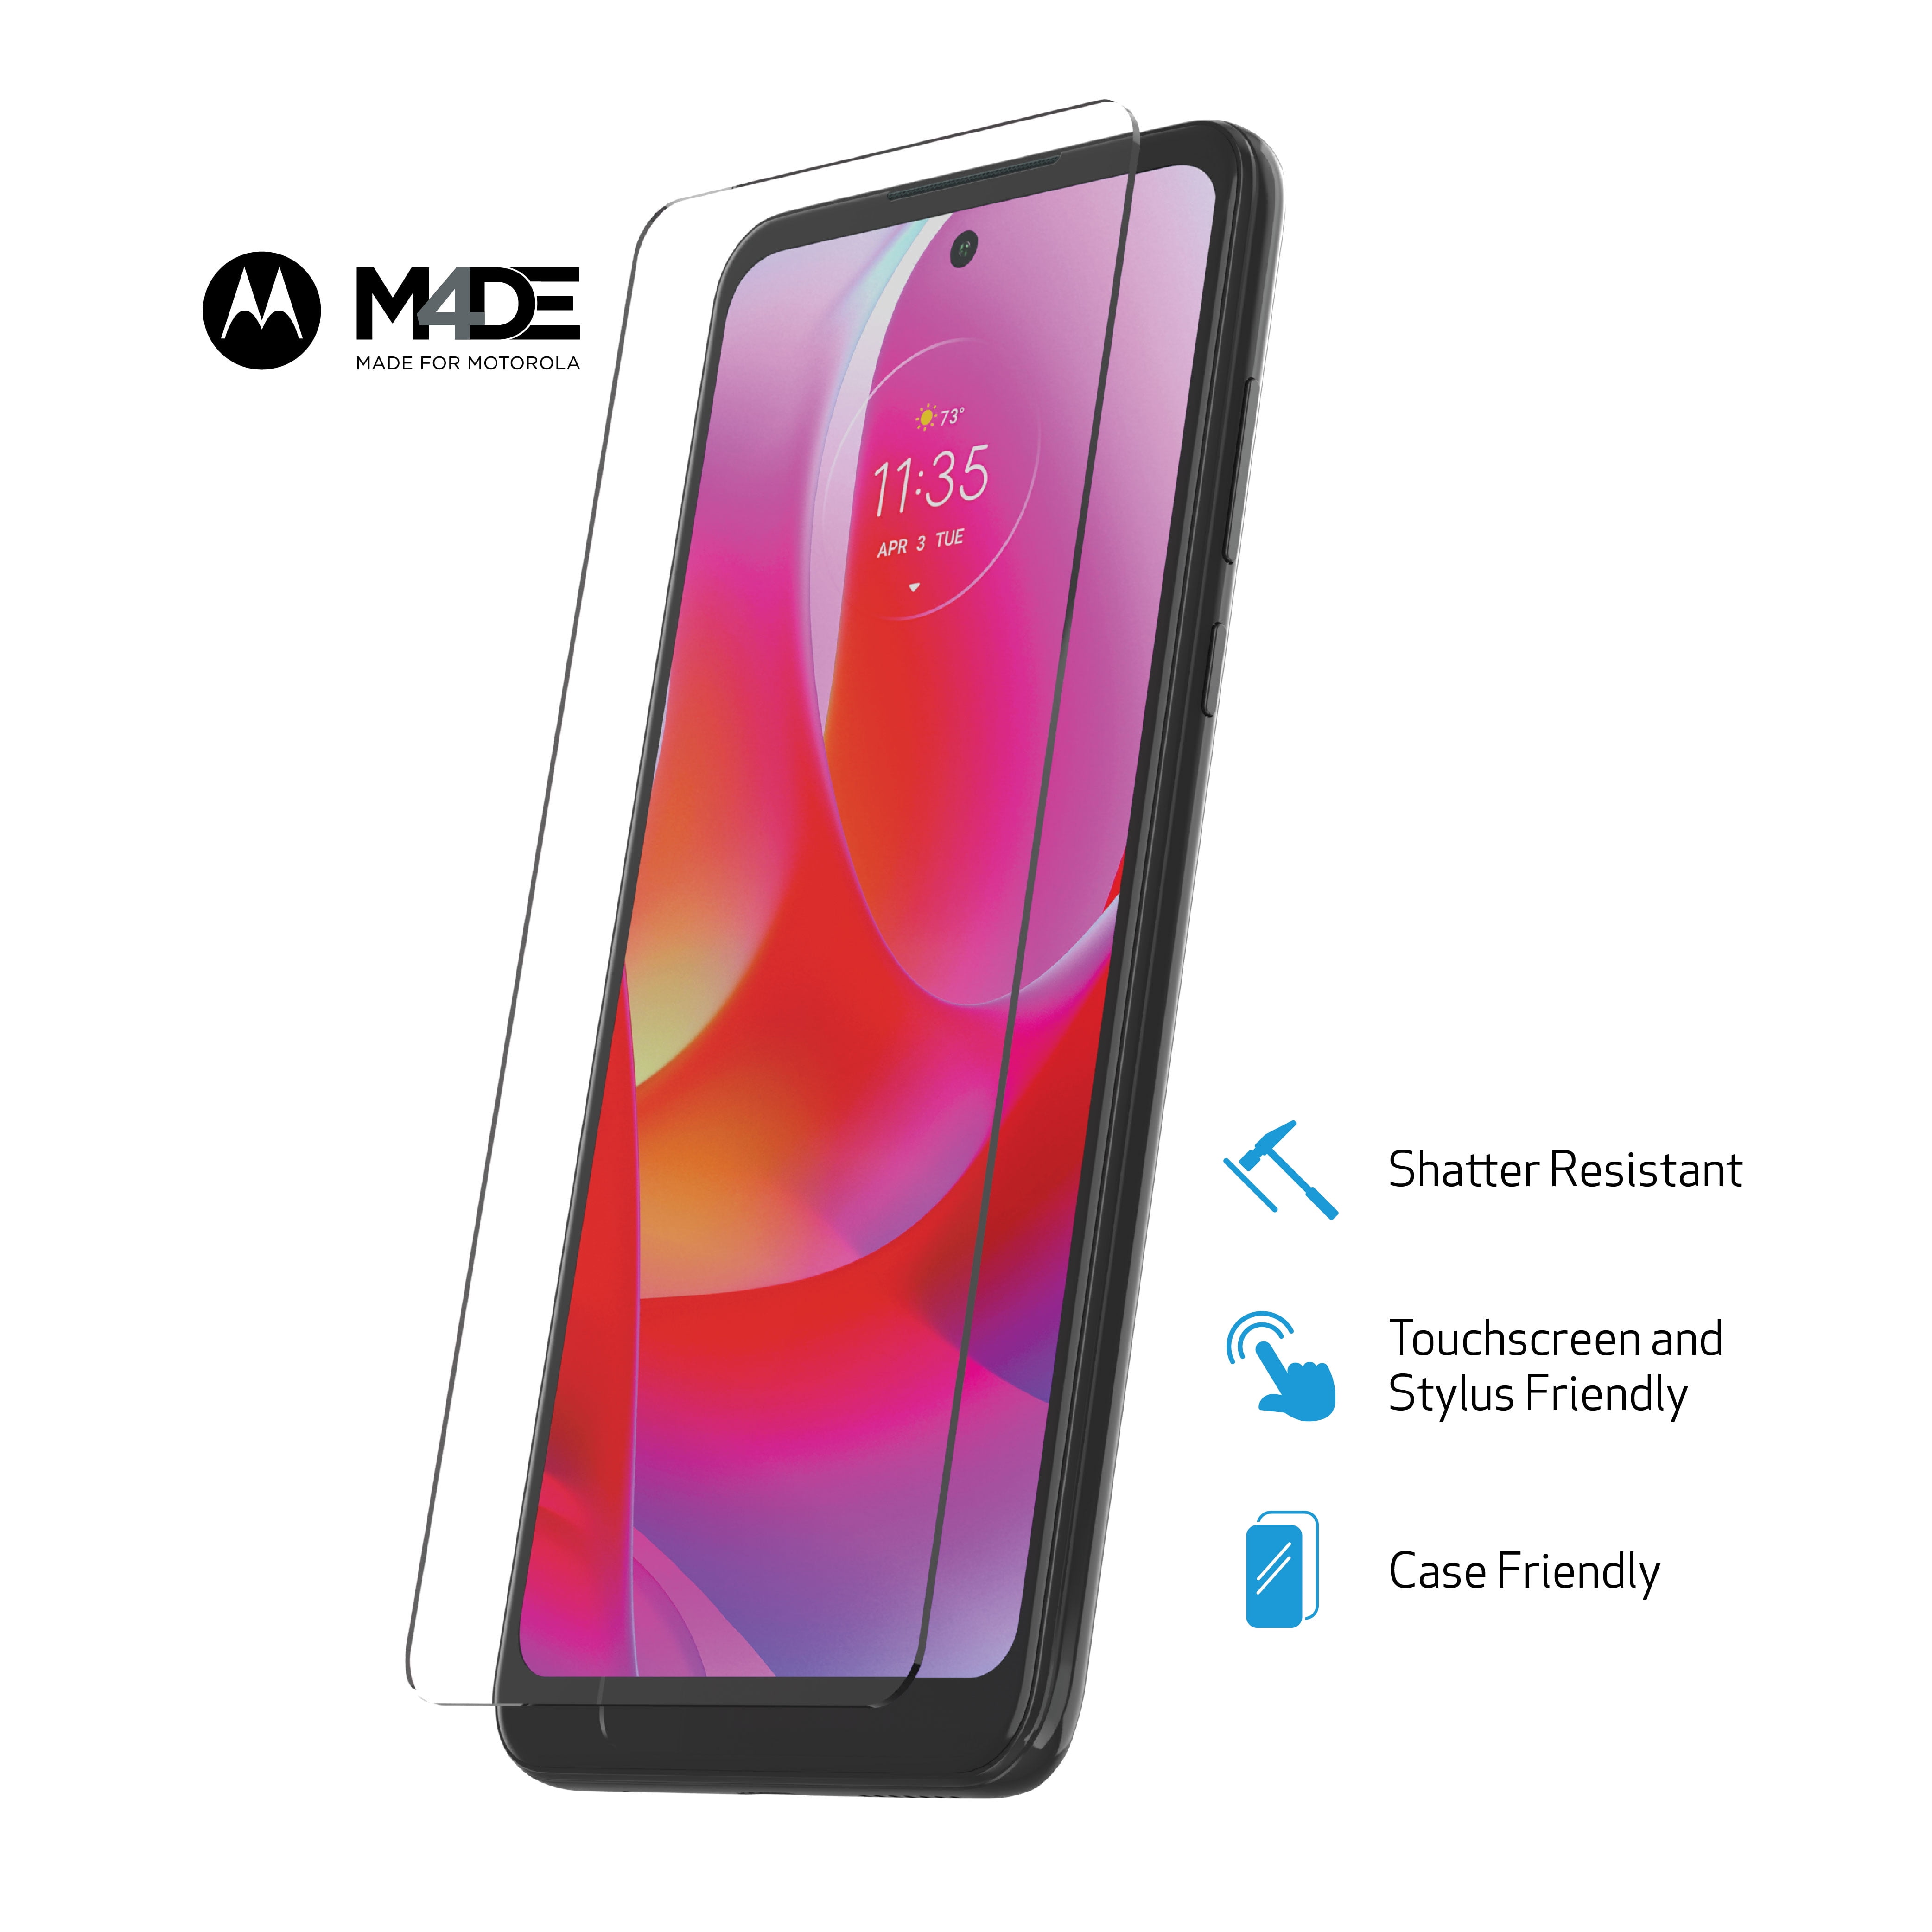 WriteRight DuraGlass Tempered Glass Screen Protector with Quick Installation Tray for Moto G Power